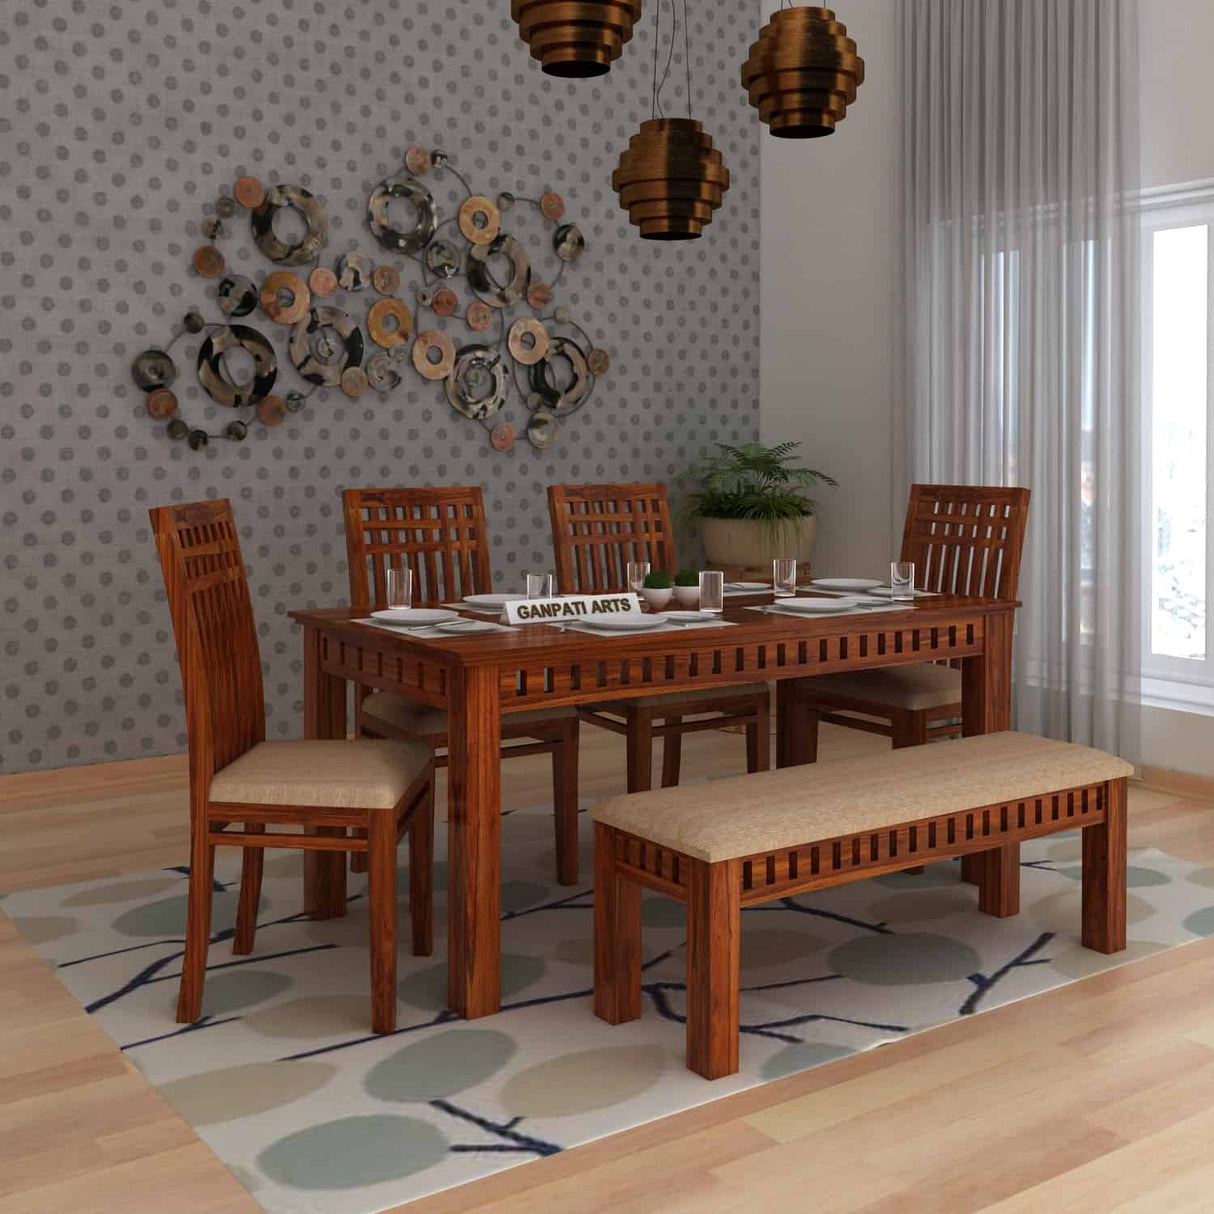 Armania Solid Sheesham Wood 6 Seater Dining Table Set - 1 Year Warranty